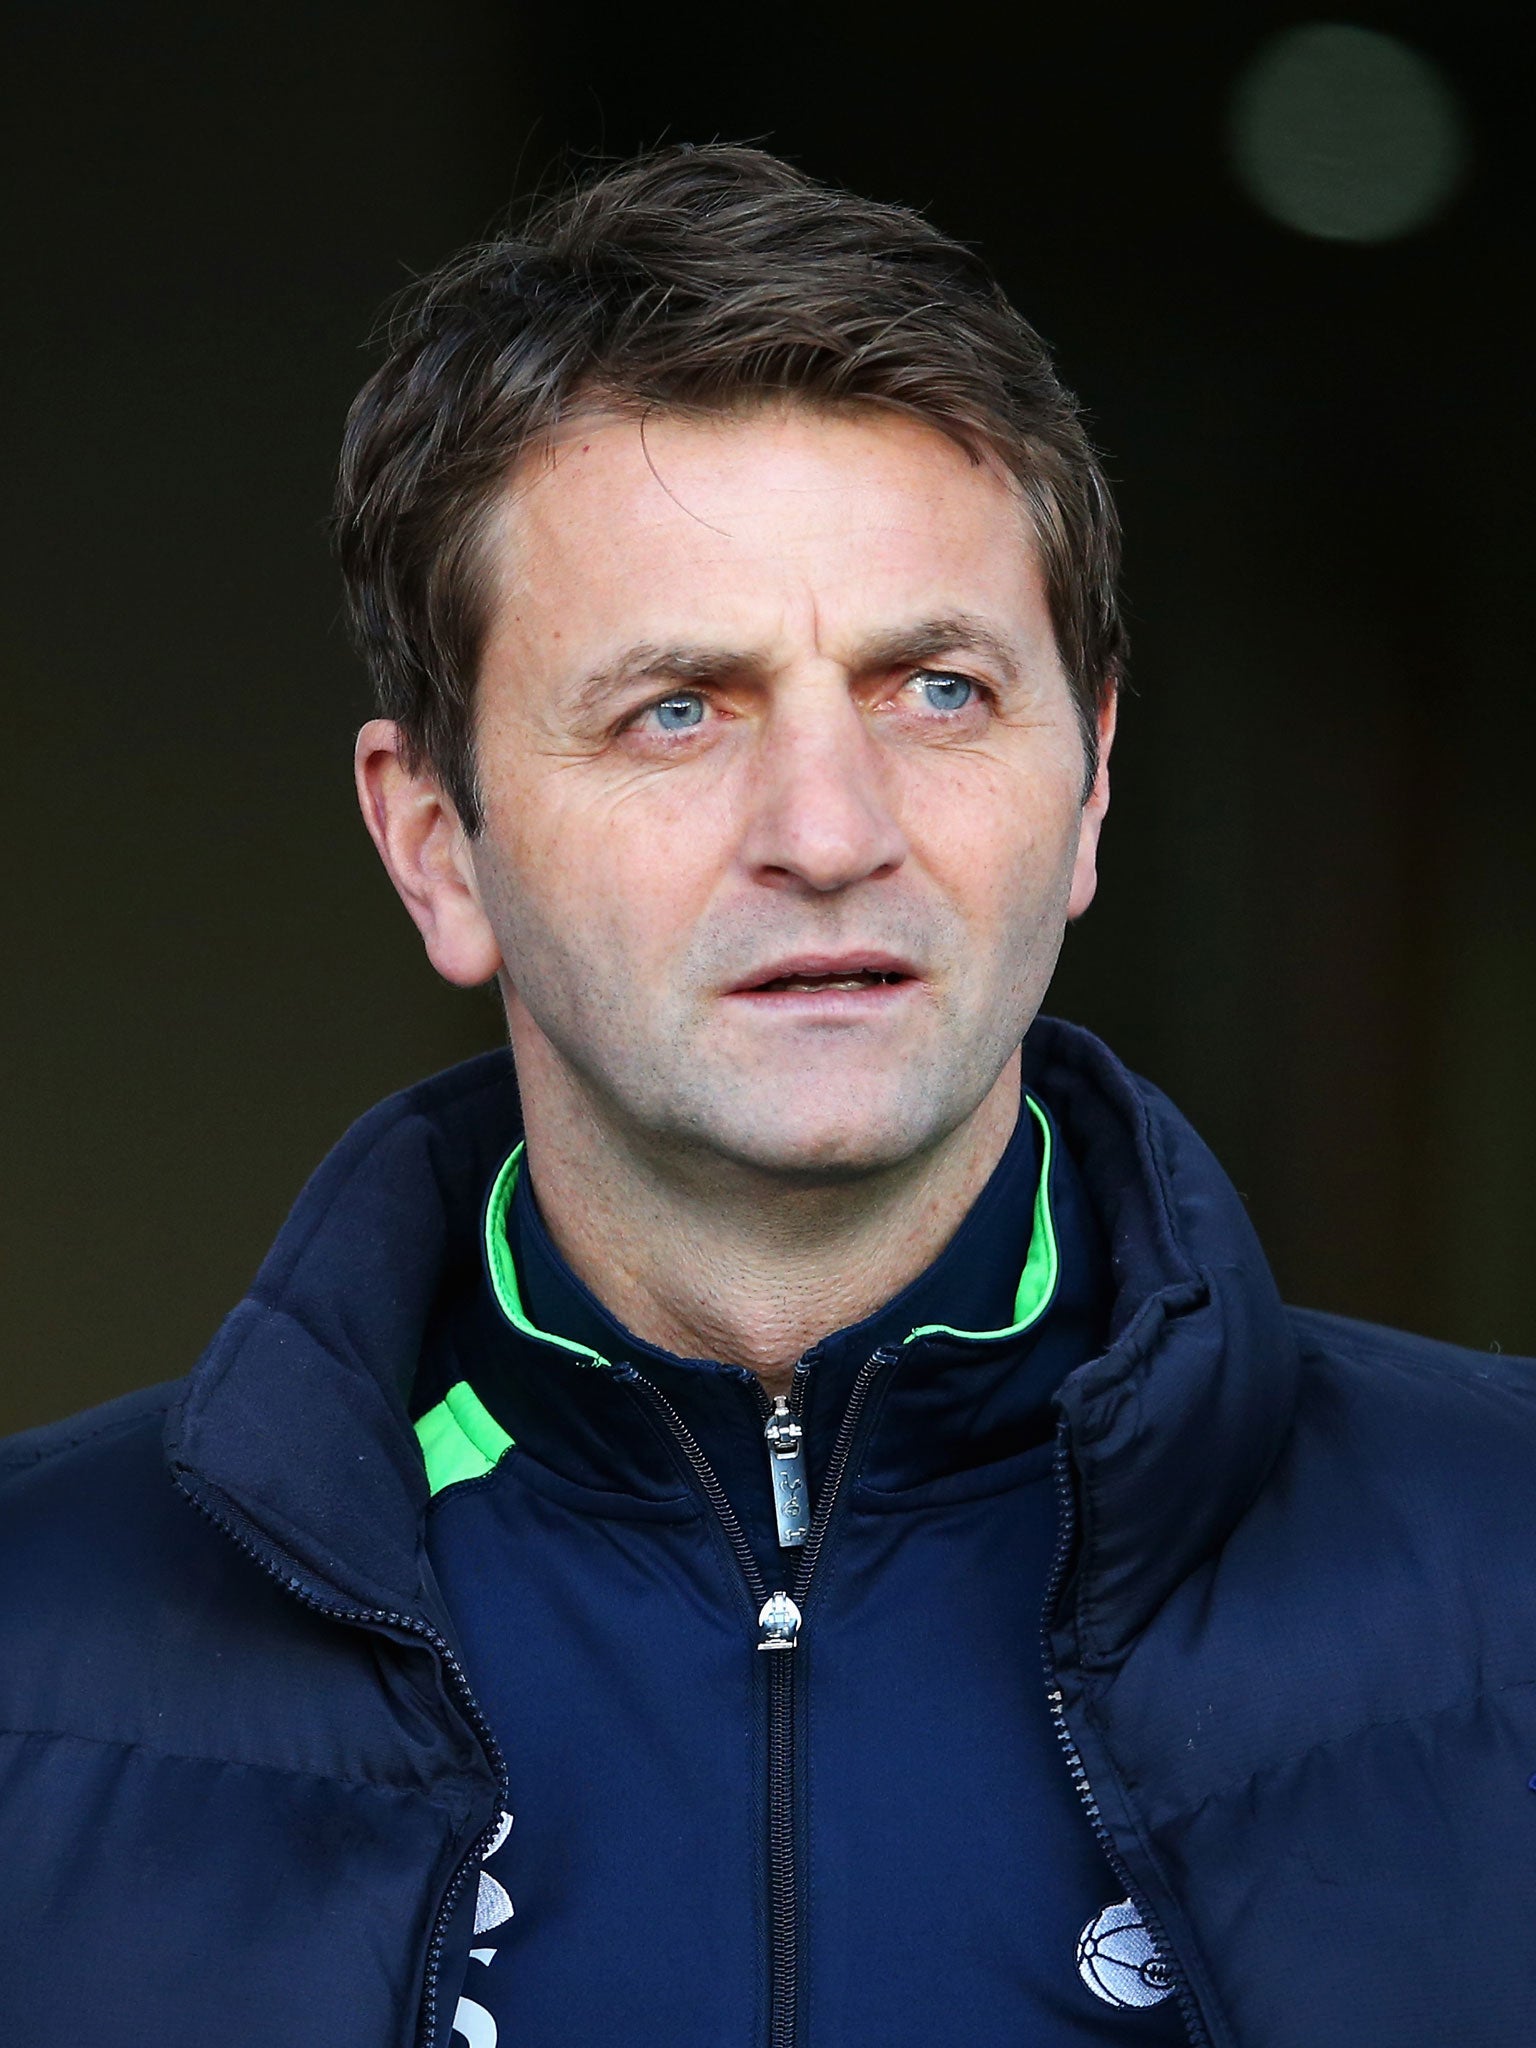 Tim Sherwood described the suggestion that his job as head coach is under threat as 'realism'